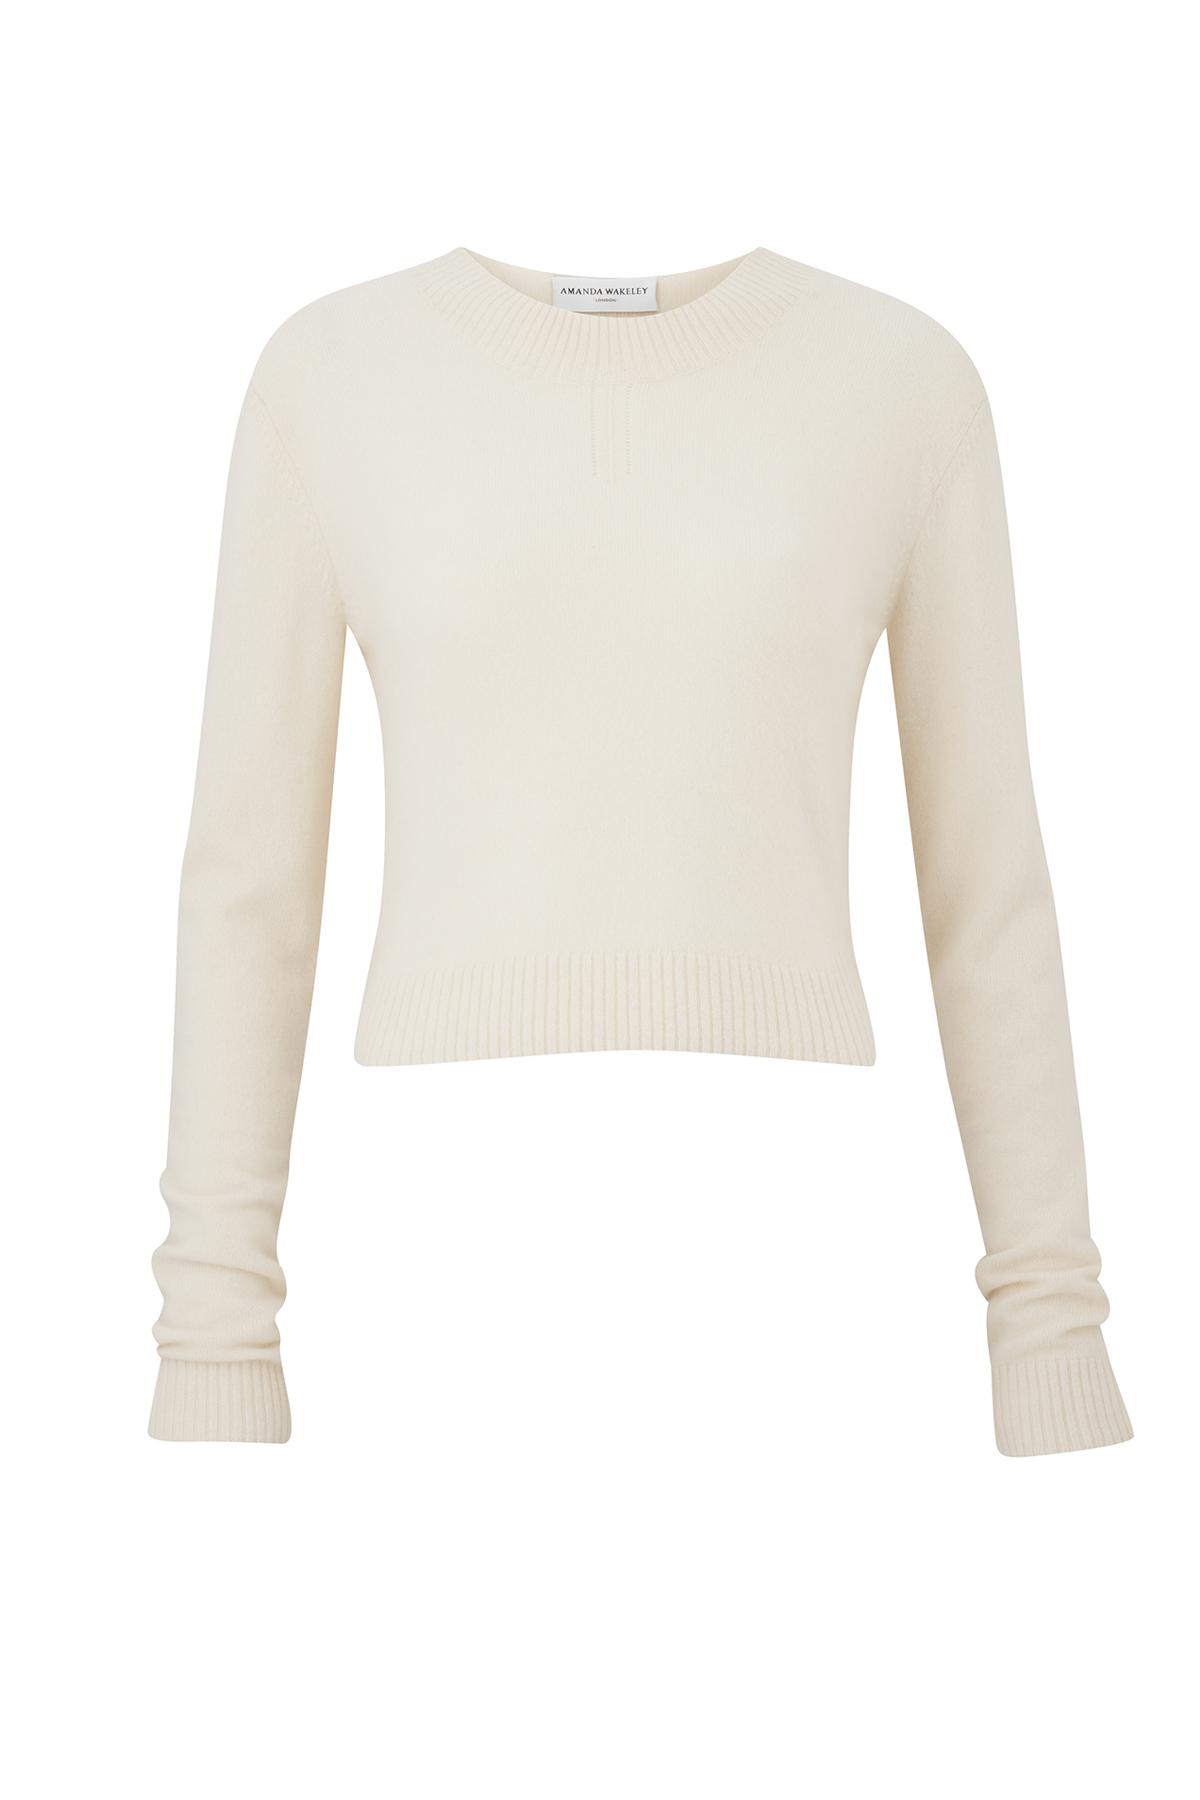 Amanda wakeley Campbell Cream Cropped Cashmere Sweater in Natural | Lyst